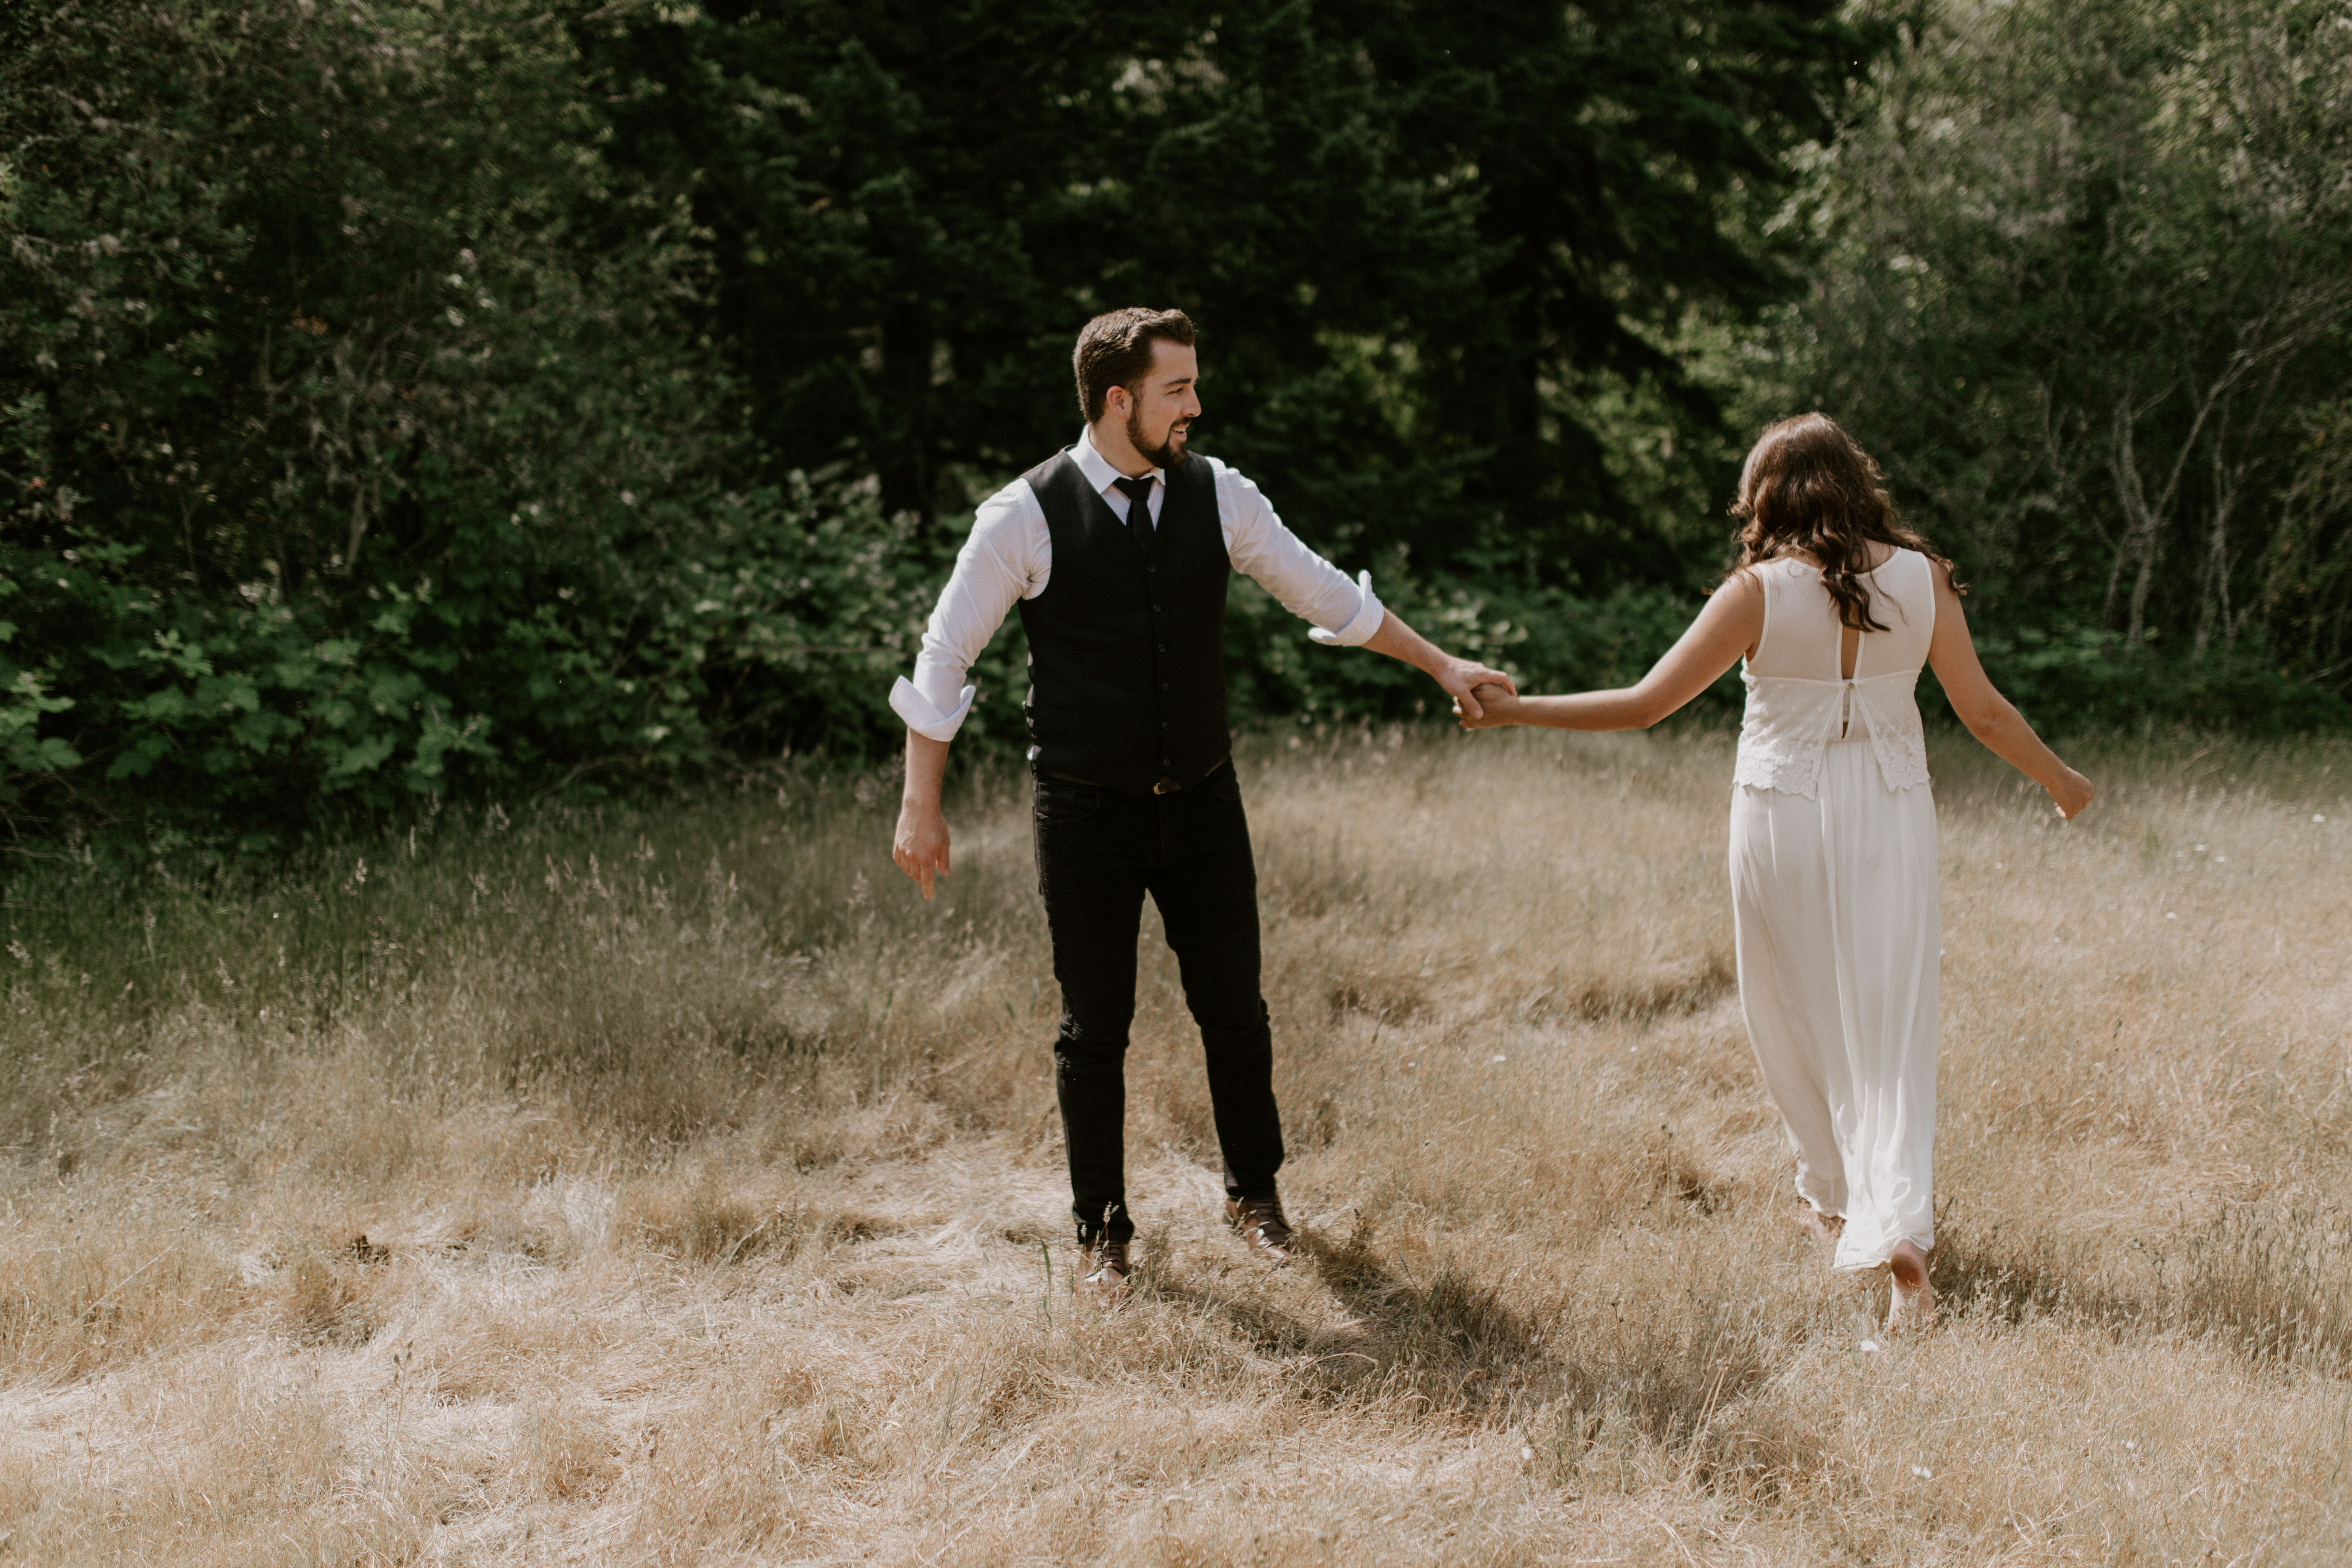 Emily and Josh holding hands and walking at Bridal Veil Falls, Oregon. Elopement photography in Portland Oregon by Sienna Plus Josh.